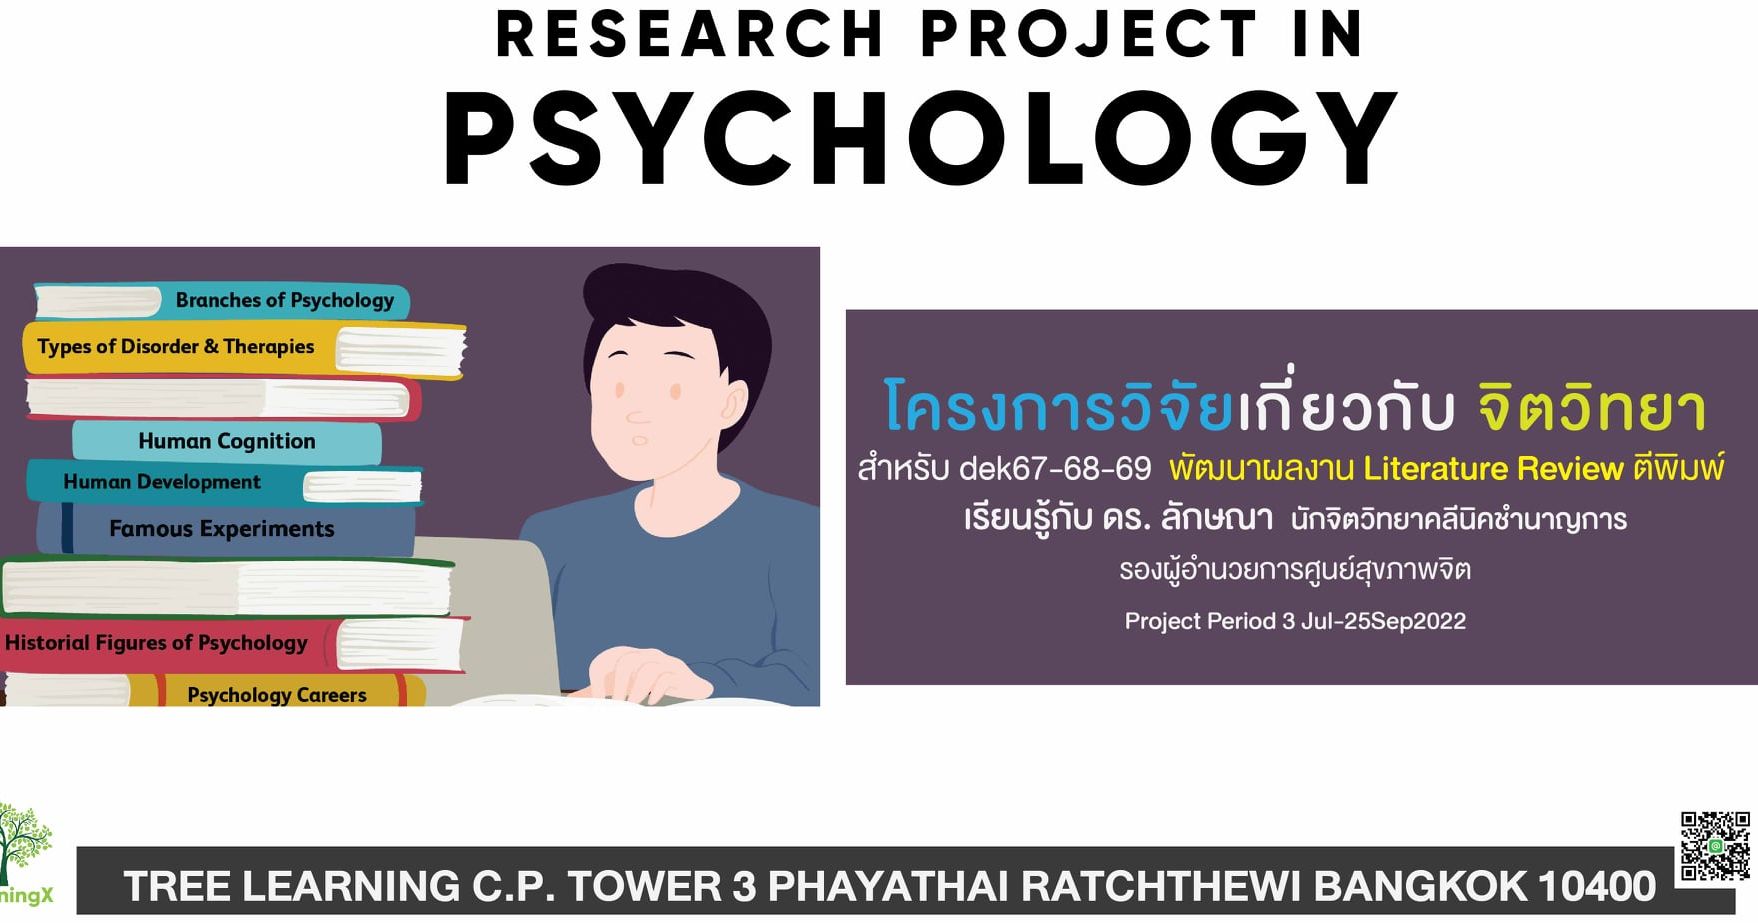 Research Project in Psychology